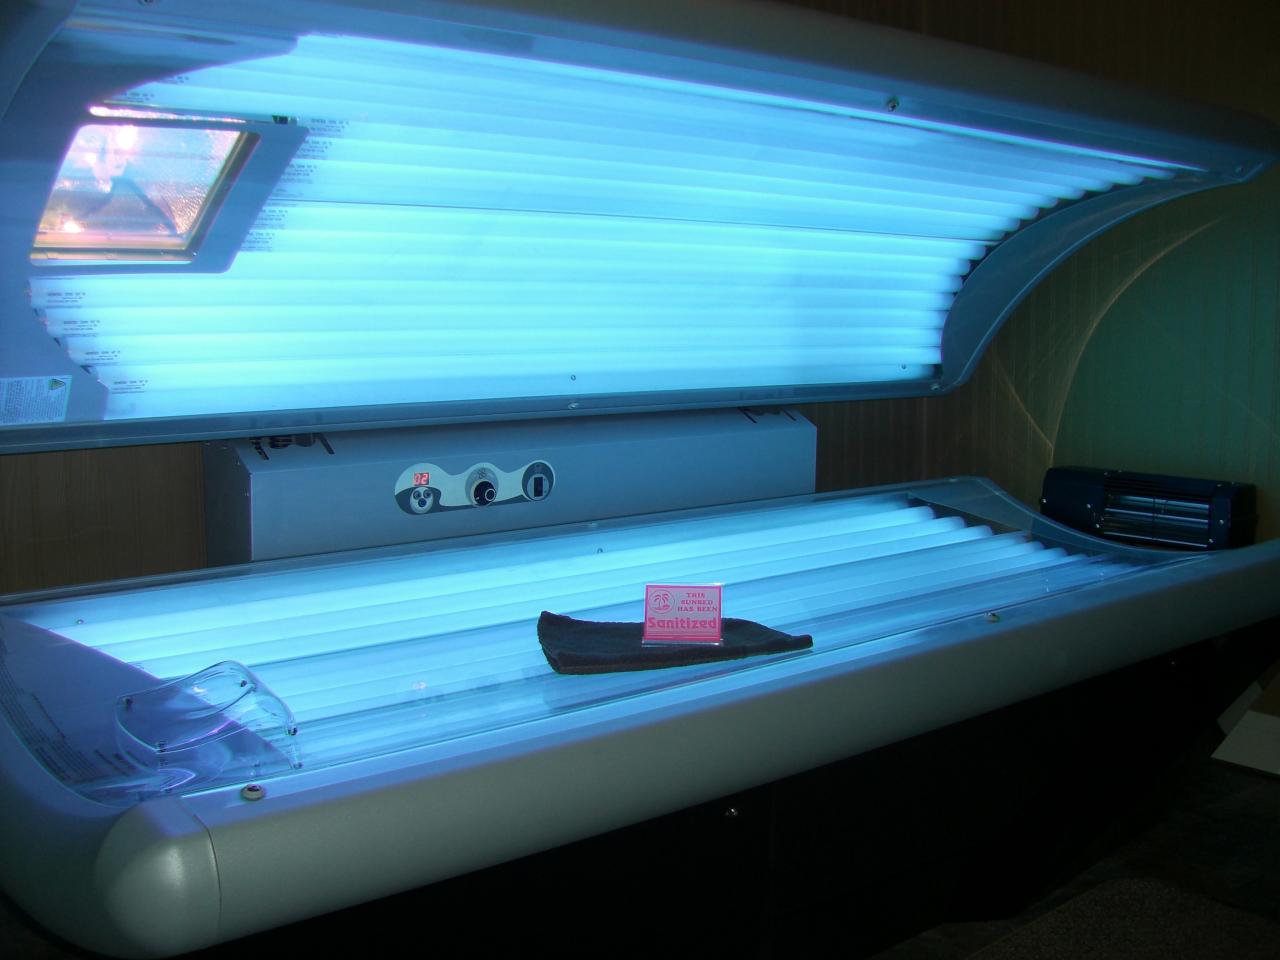 The U.S. Centers for Disease Control and Prevention says that half as many high school students use indoor tanning beds now compared to the amount reported in 2009.